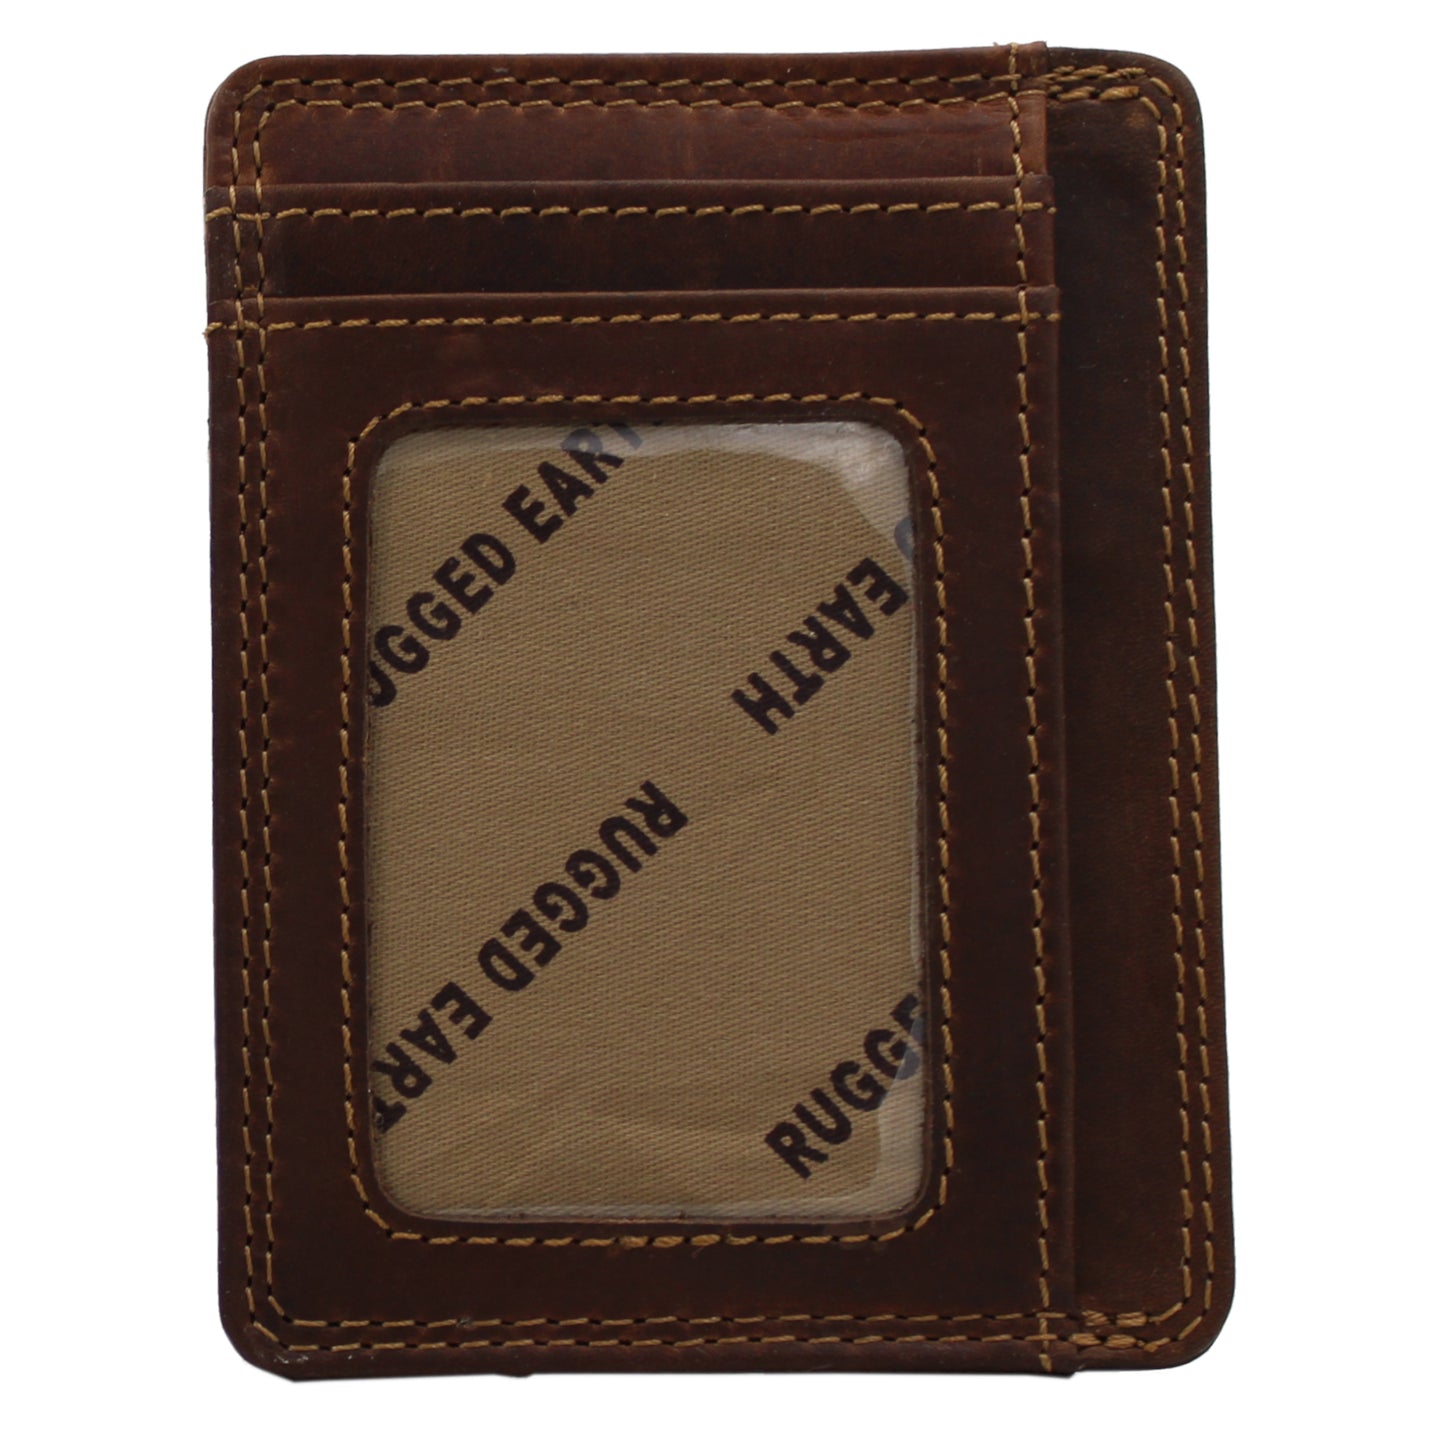 RE Leather Credit Card holder